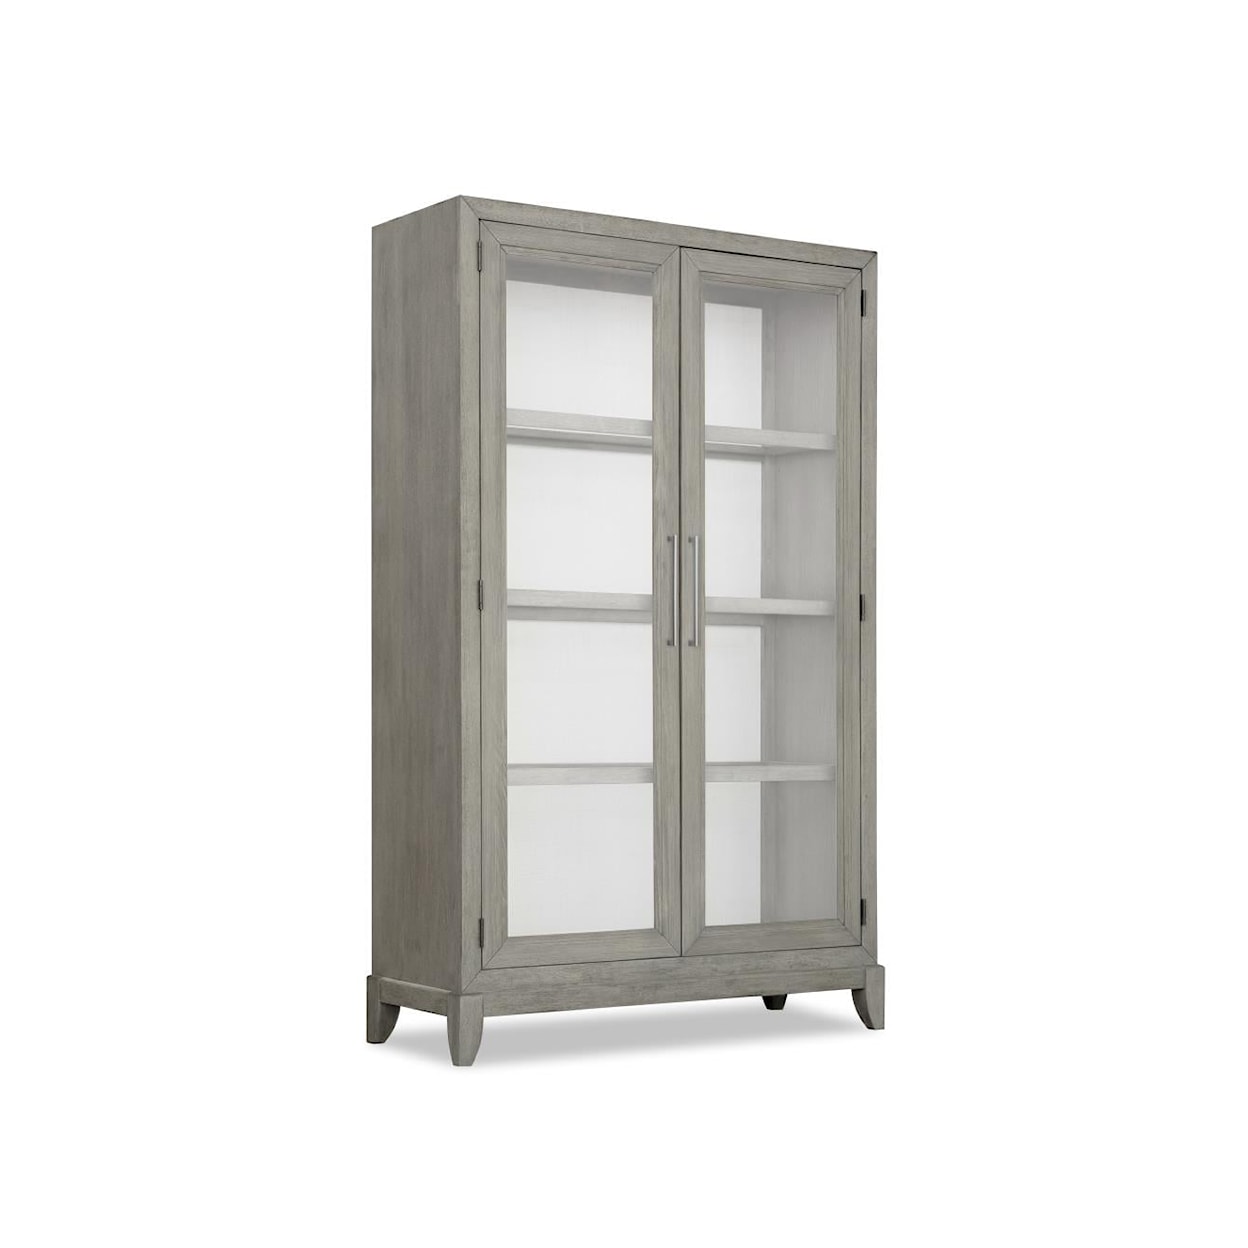 Trisha Yearwood Home Collection by Legacy Classic Staycation Display Cabinet